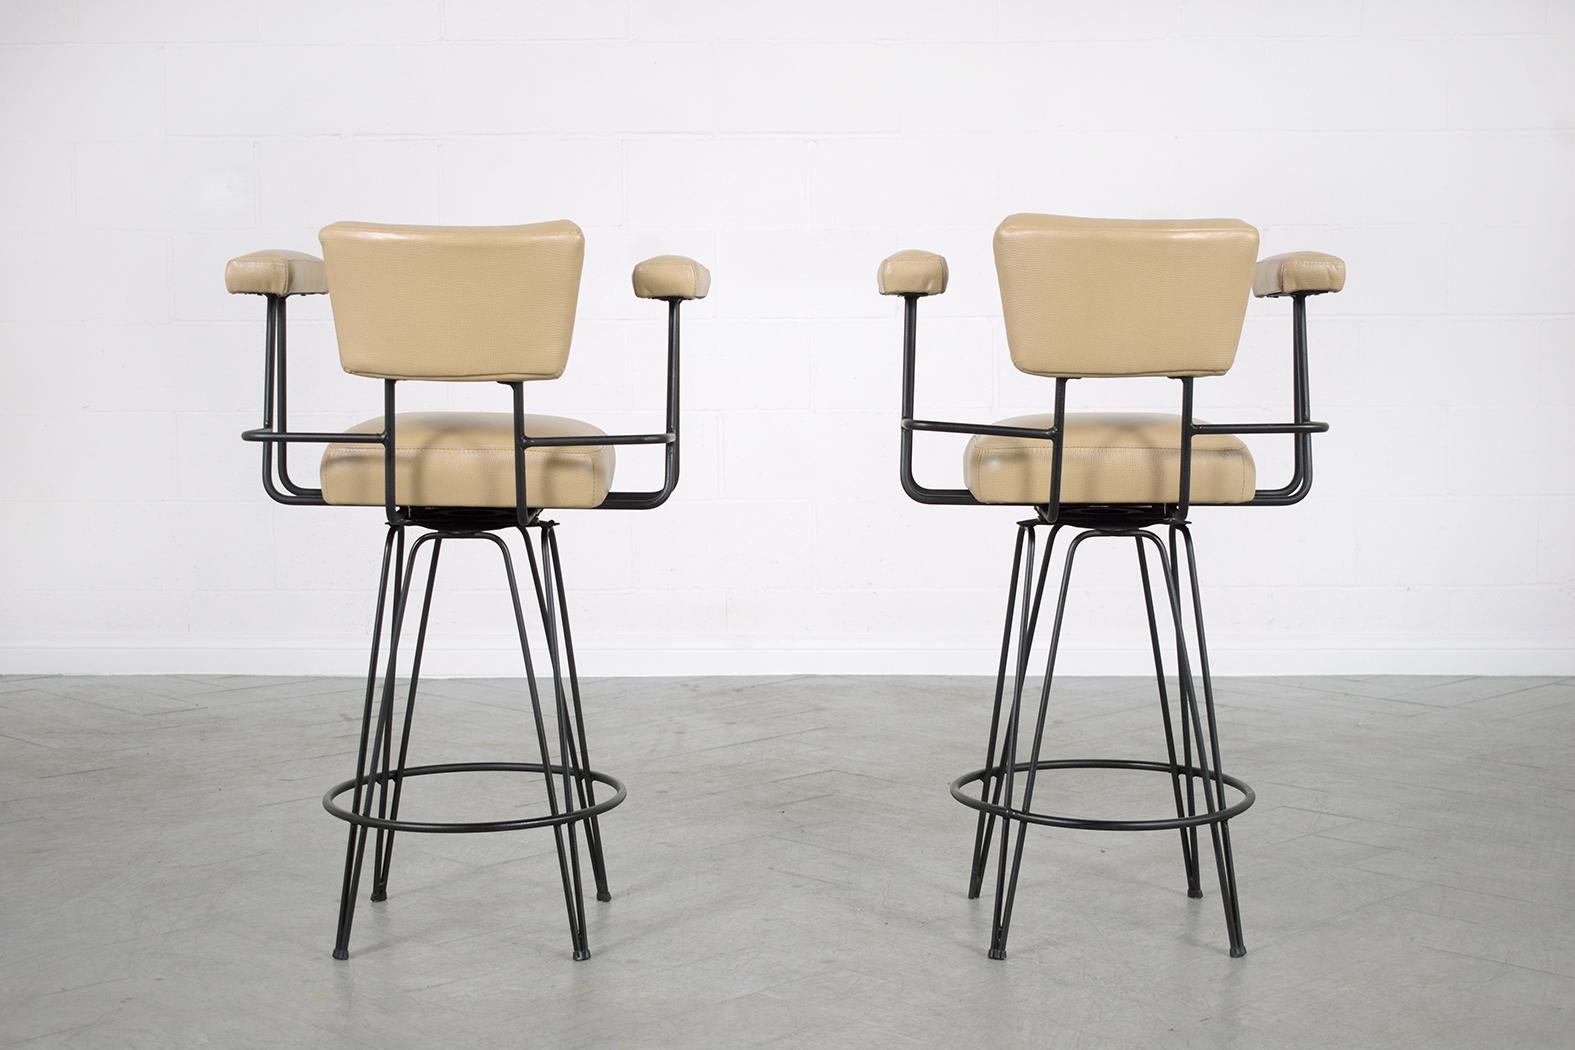 Restored 1970s Mid-Century Modern Swivel Barstools in Beige Leather For Sale 4